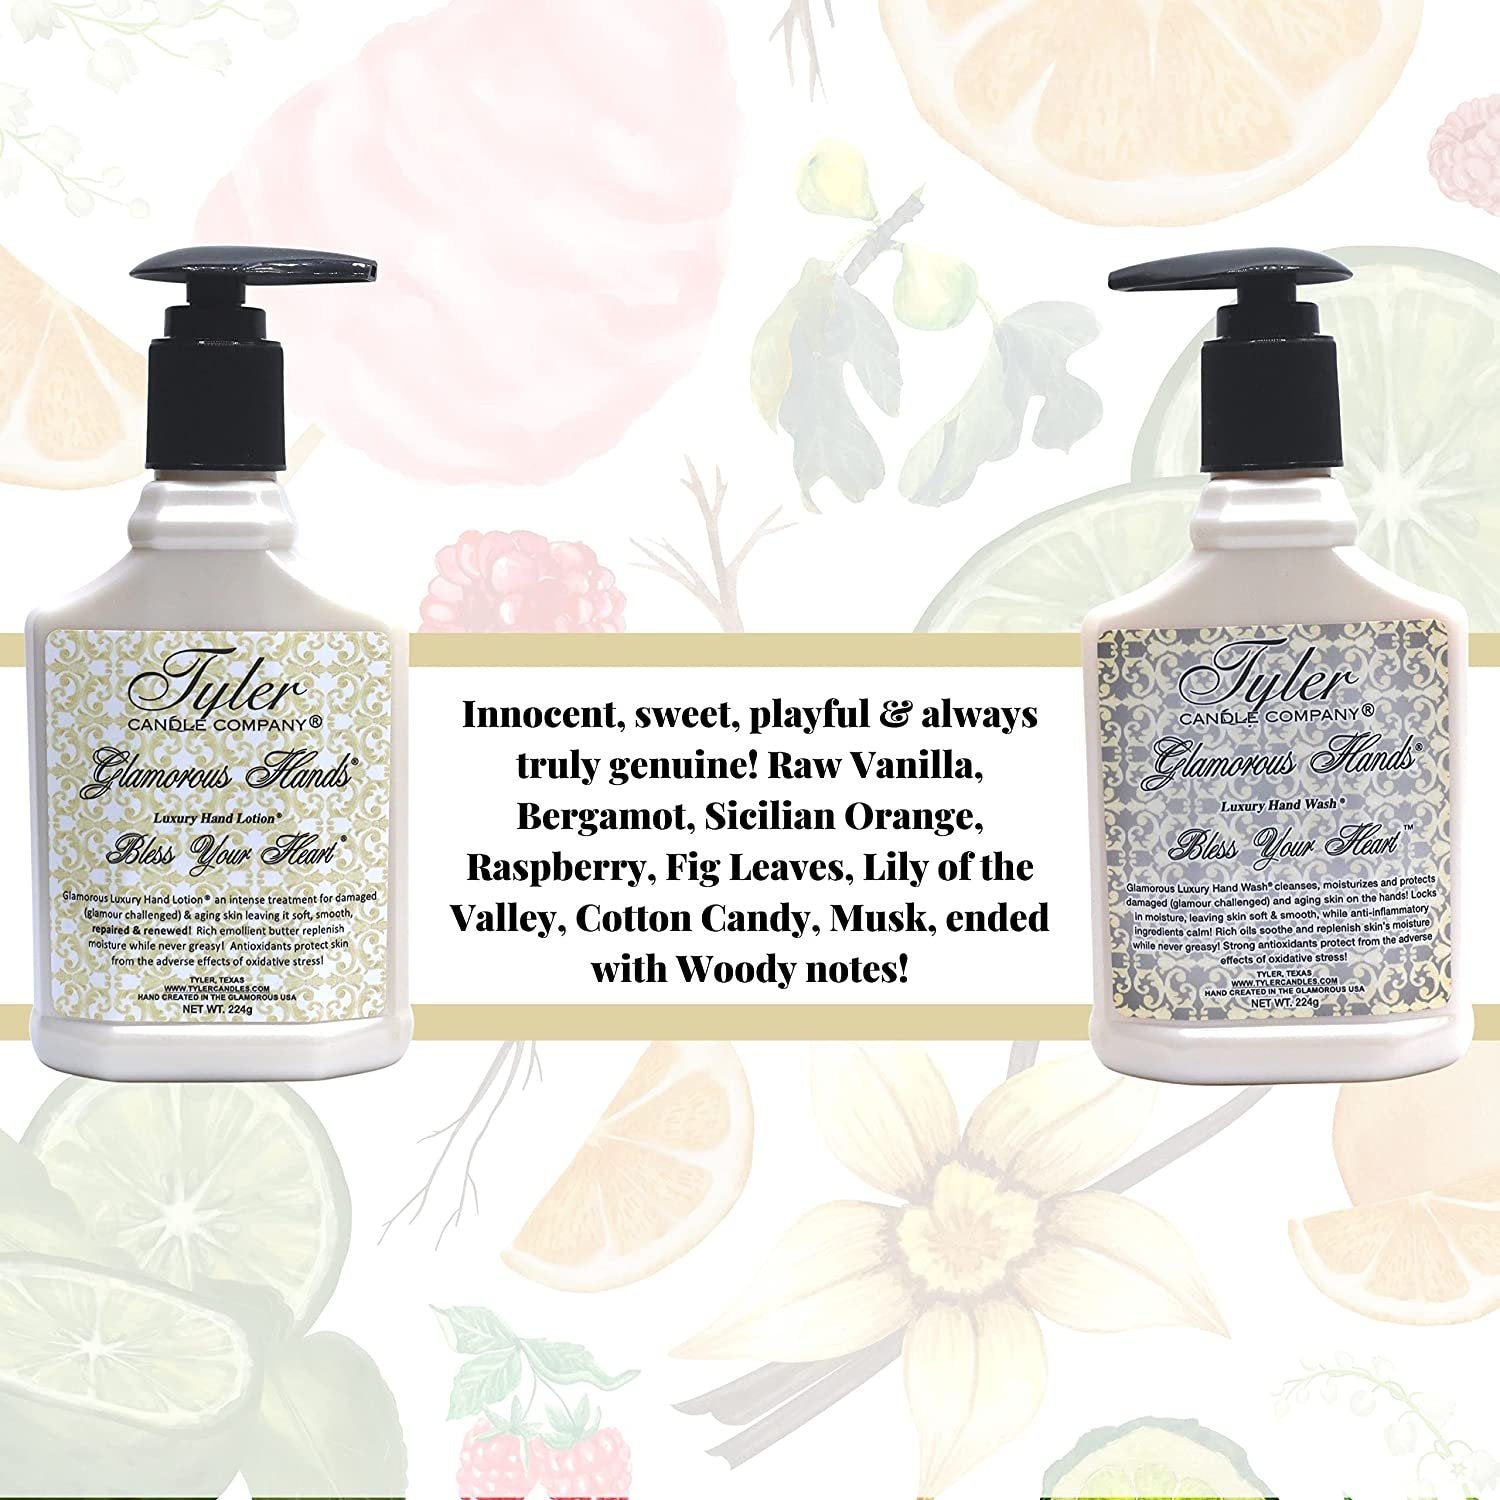 Tyler Candle Company Bless Your Heart Glamorous Hand Wash and Hand Lotion Gift Set - Pack of 2 8 Oz Tyler Bless Your Heart Scented Hand Cream Pump Bottles for Luxury Skin Care with Bonus Keychain